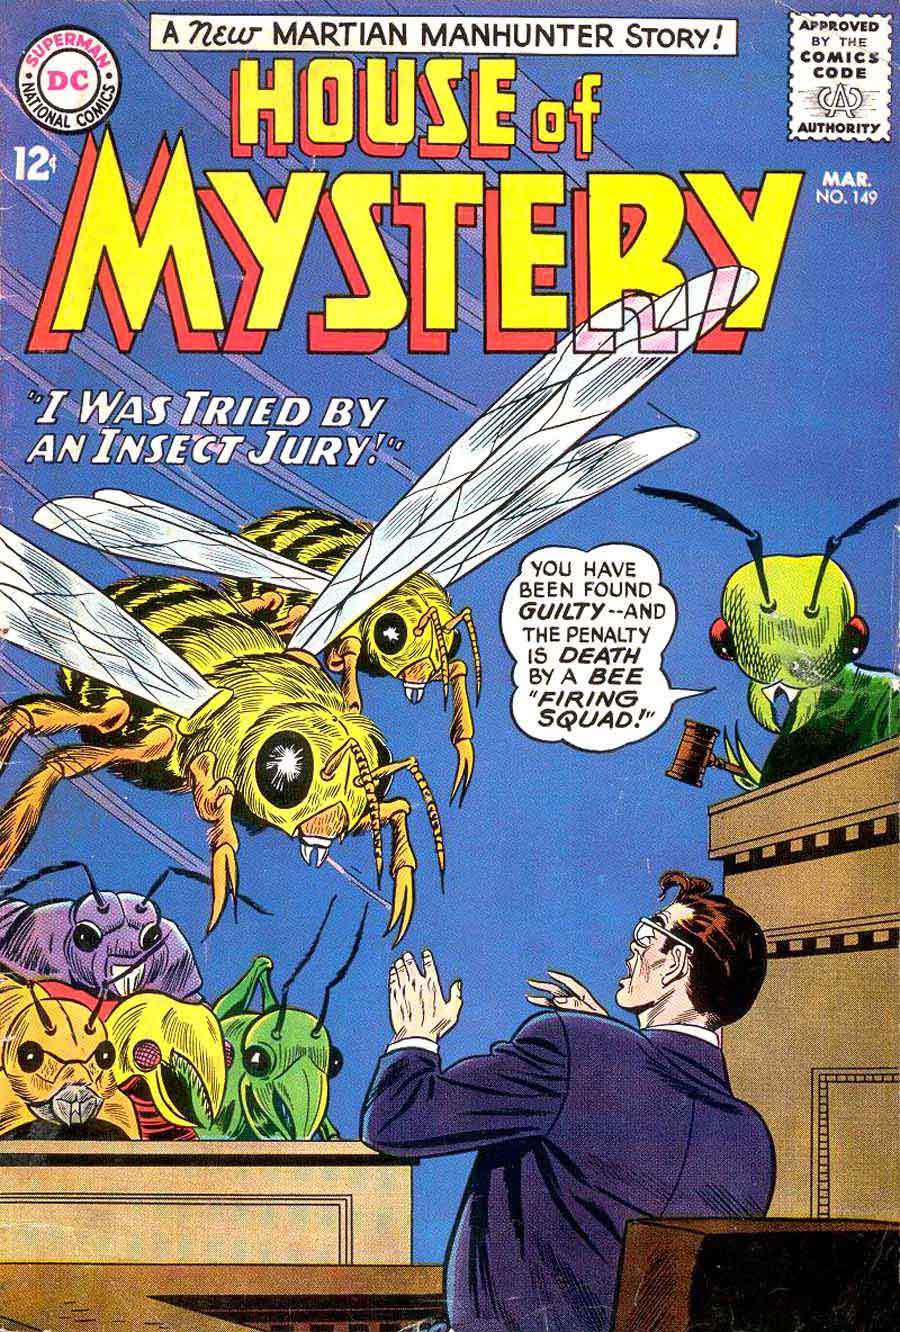 House of Mystery #149 cover